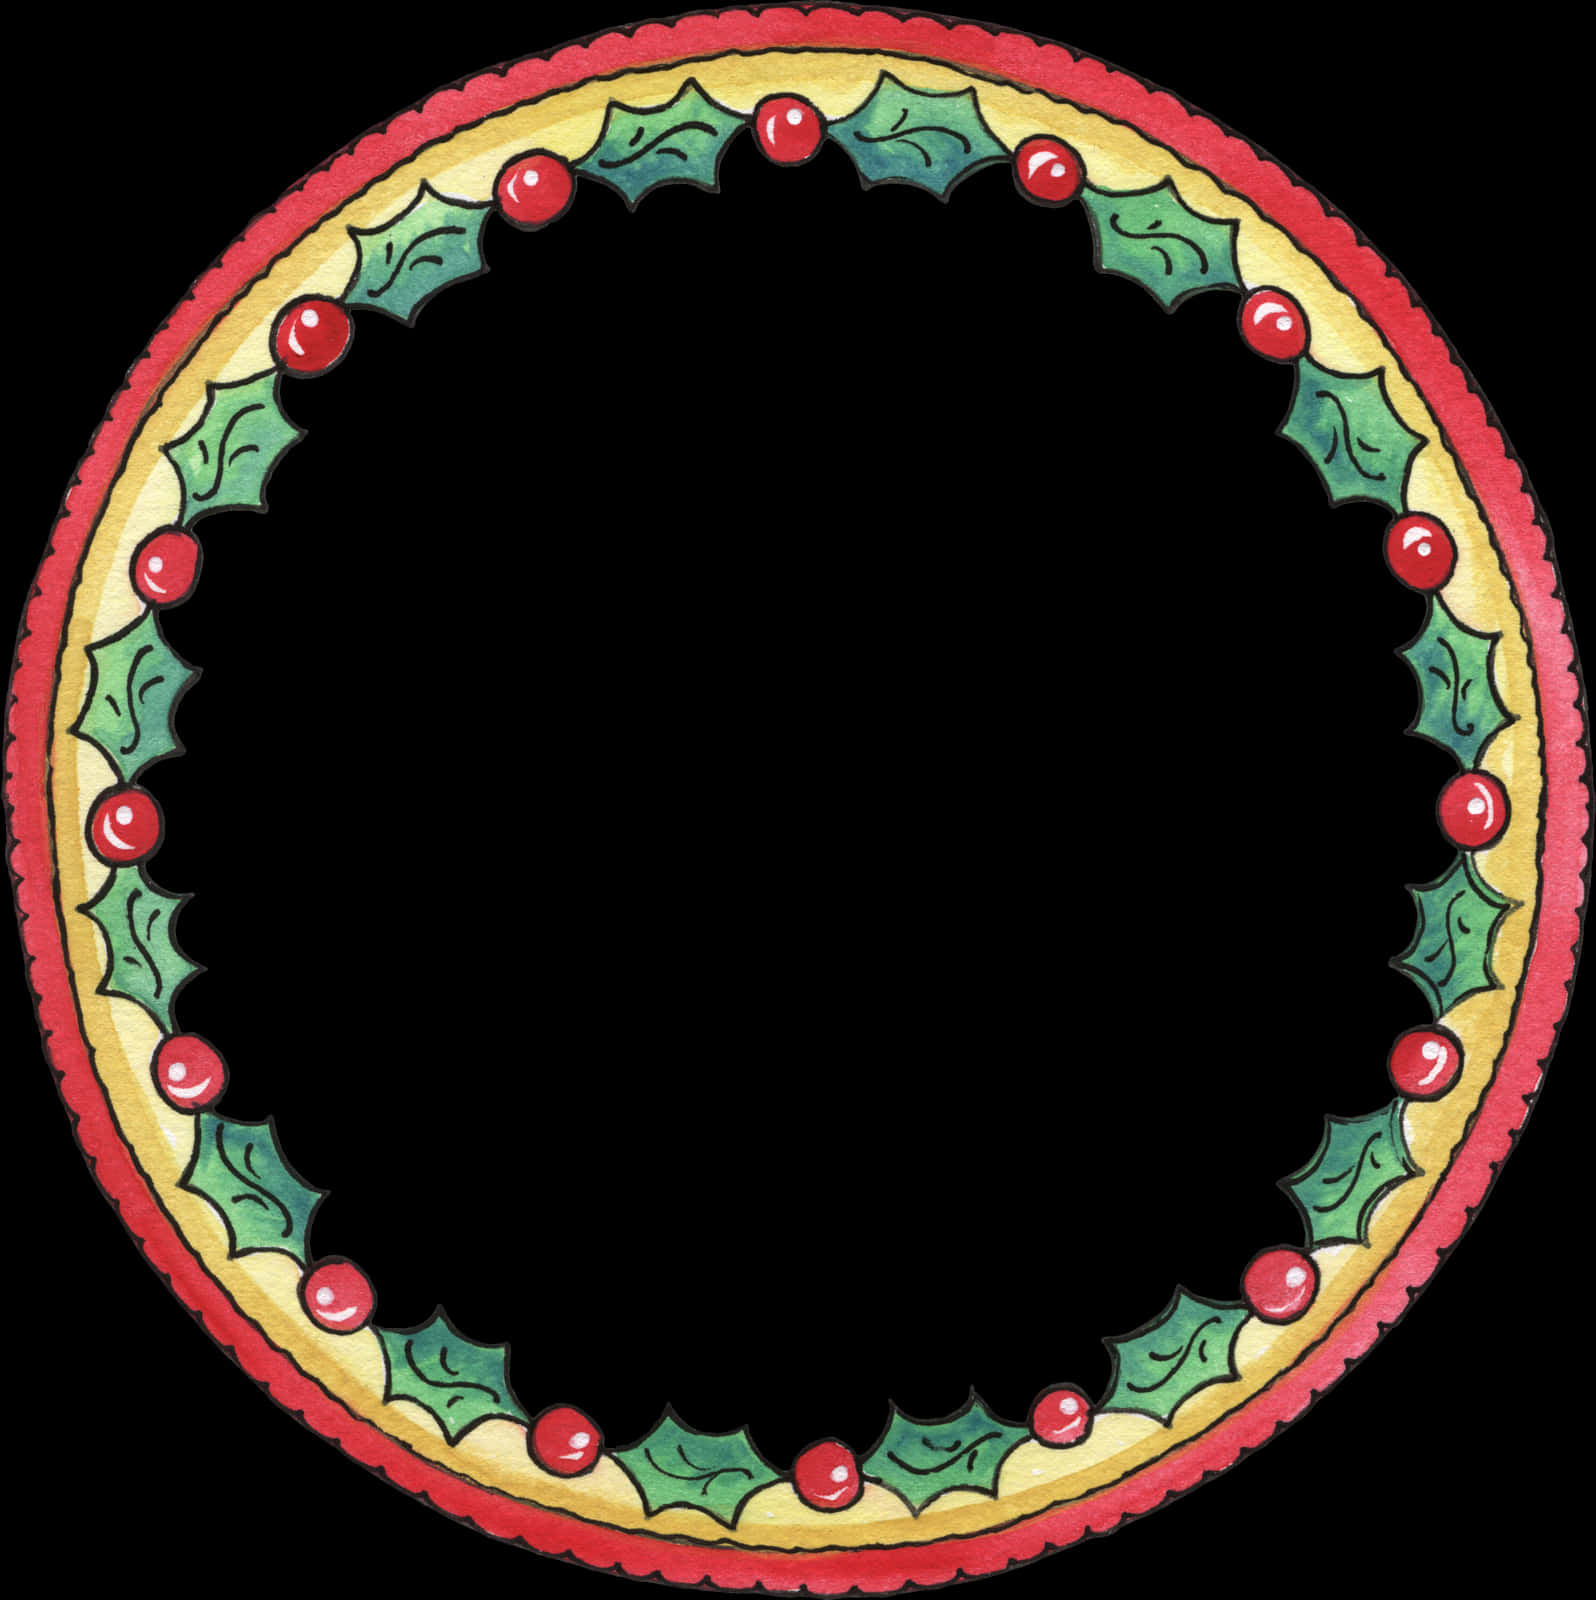 A Circular Frame With Holly Leaves And Berries